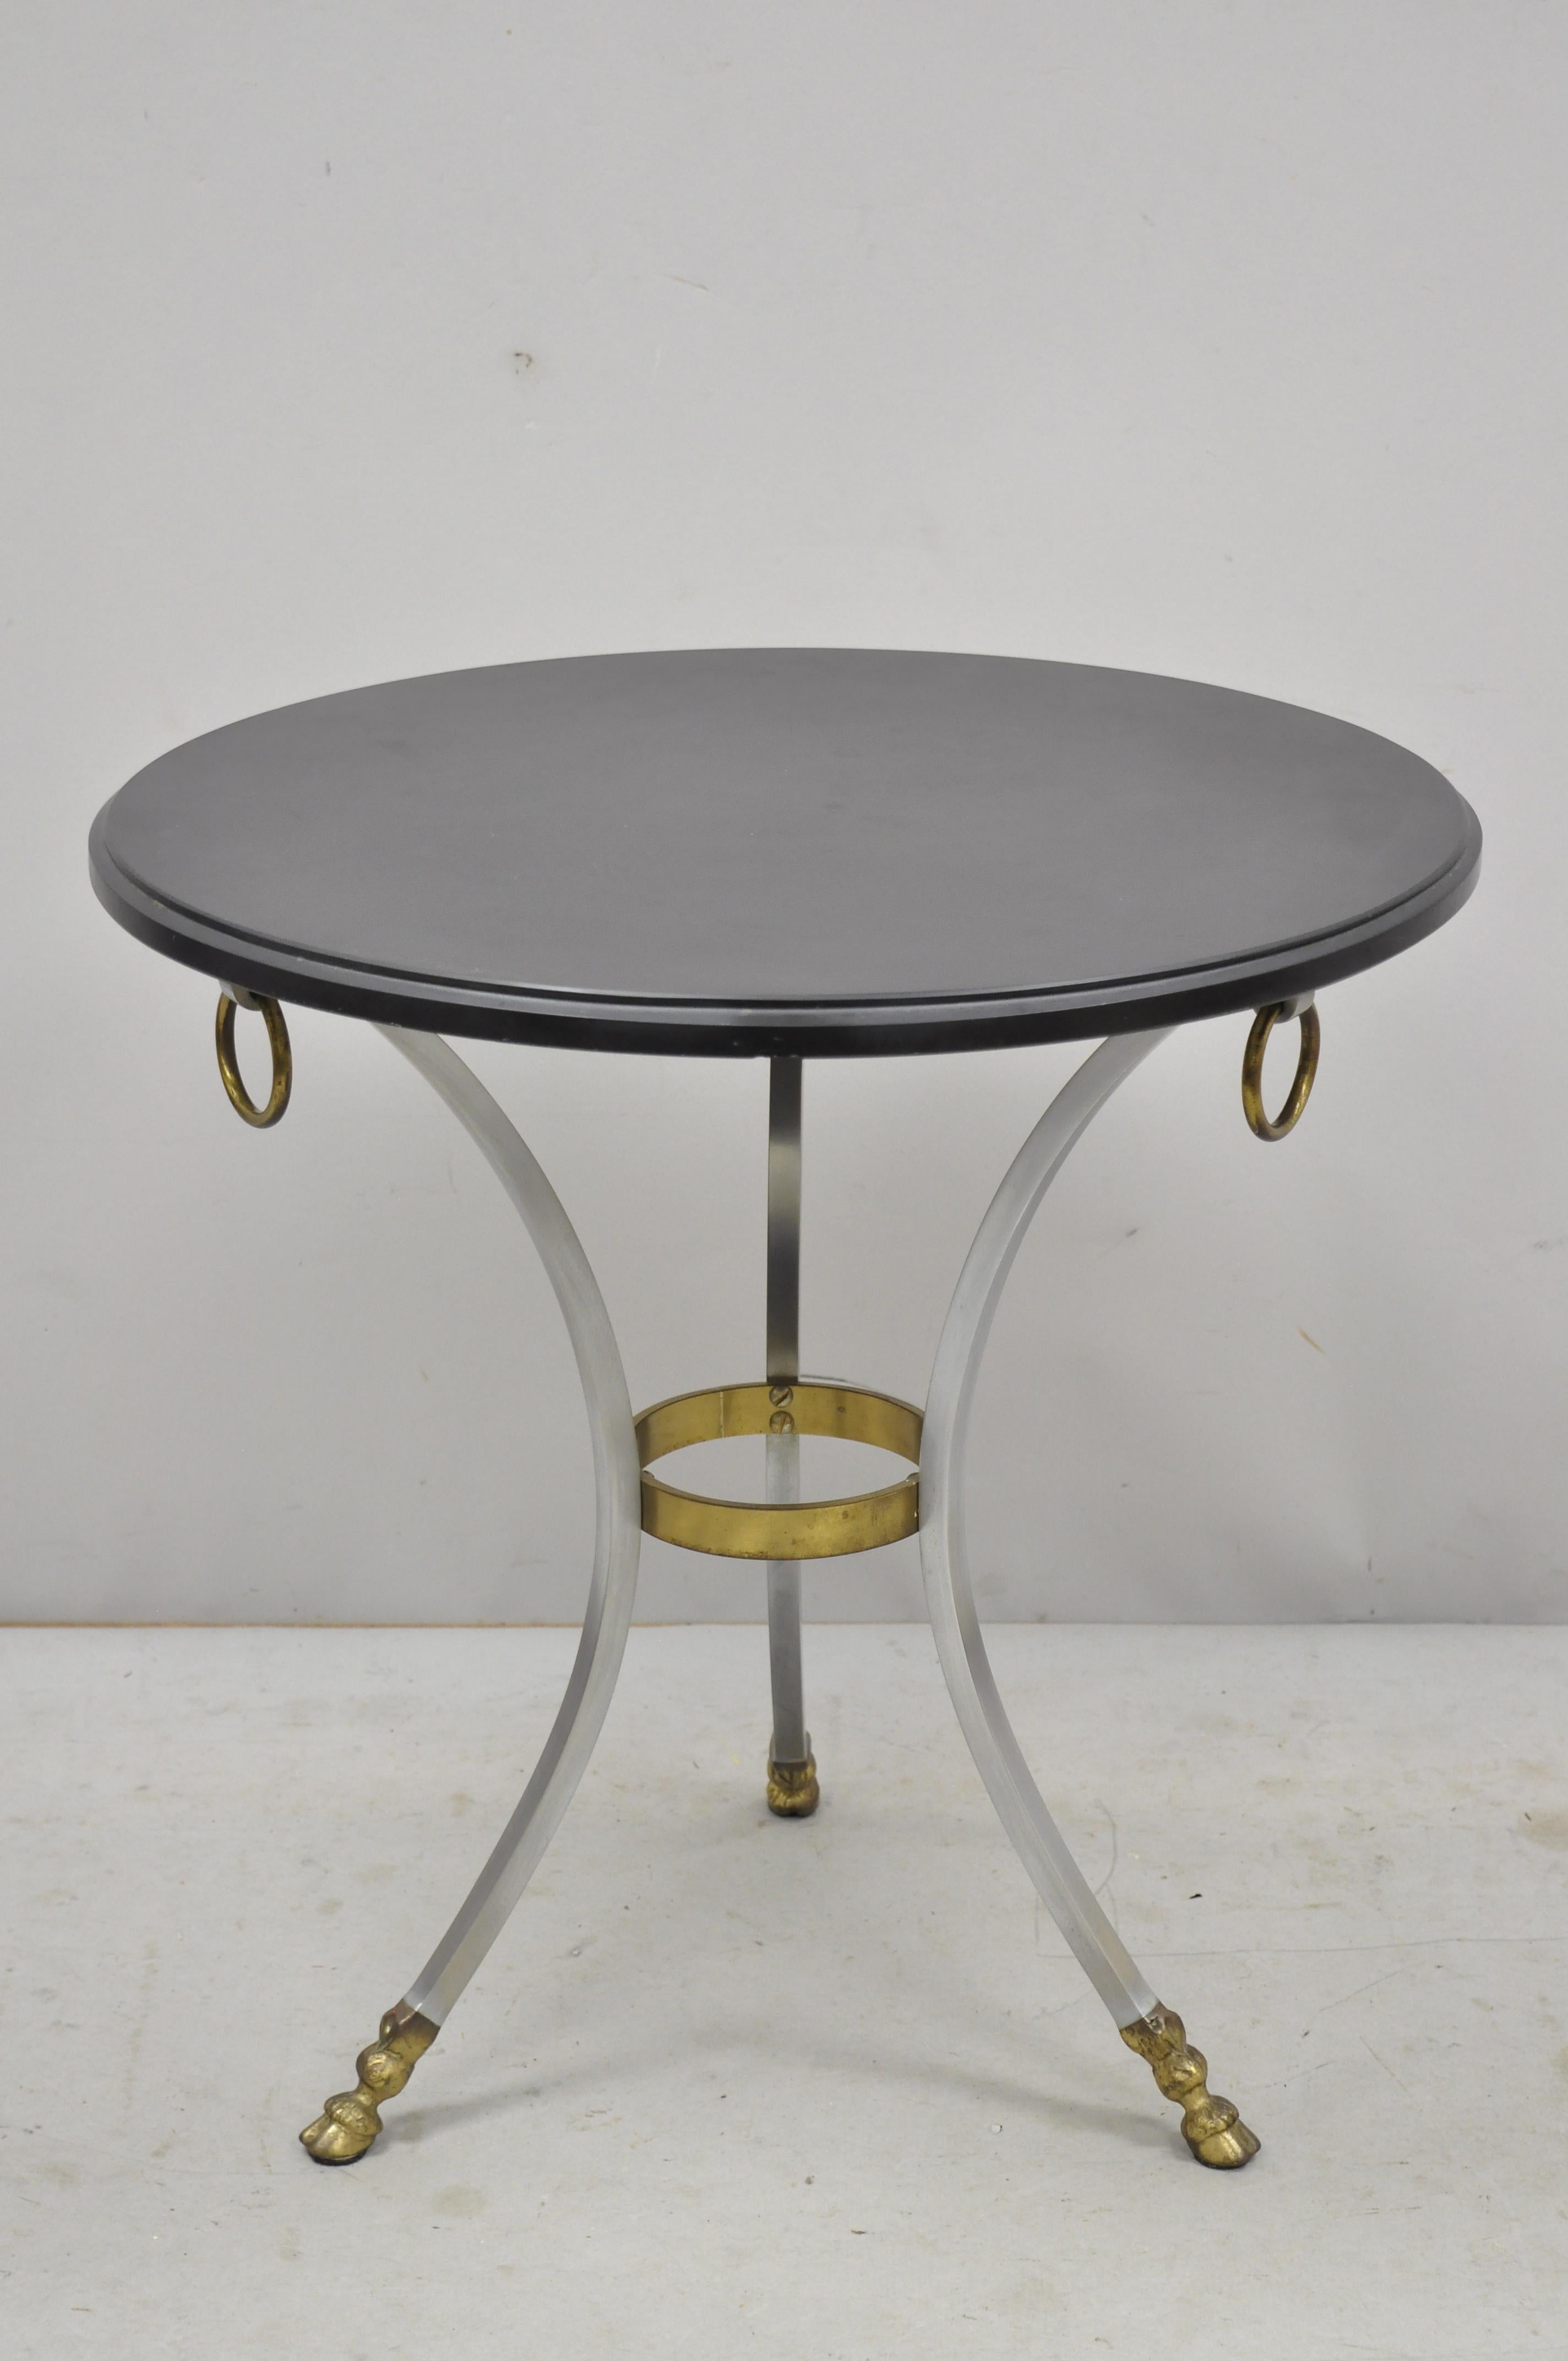 Maison Jansen Style Steel and Bronze Round Slate Top Hoof Feet Lamp Table For Sale 1